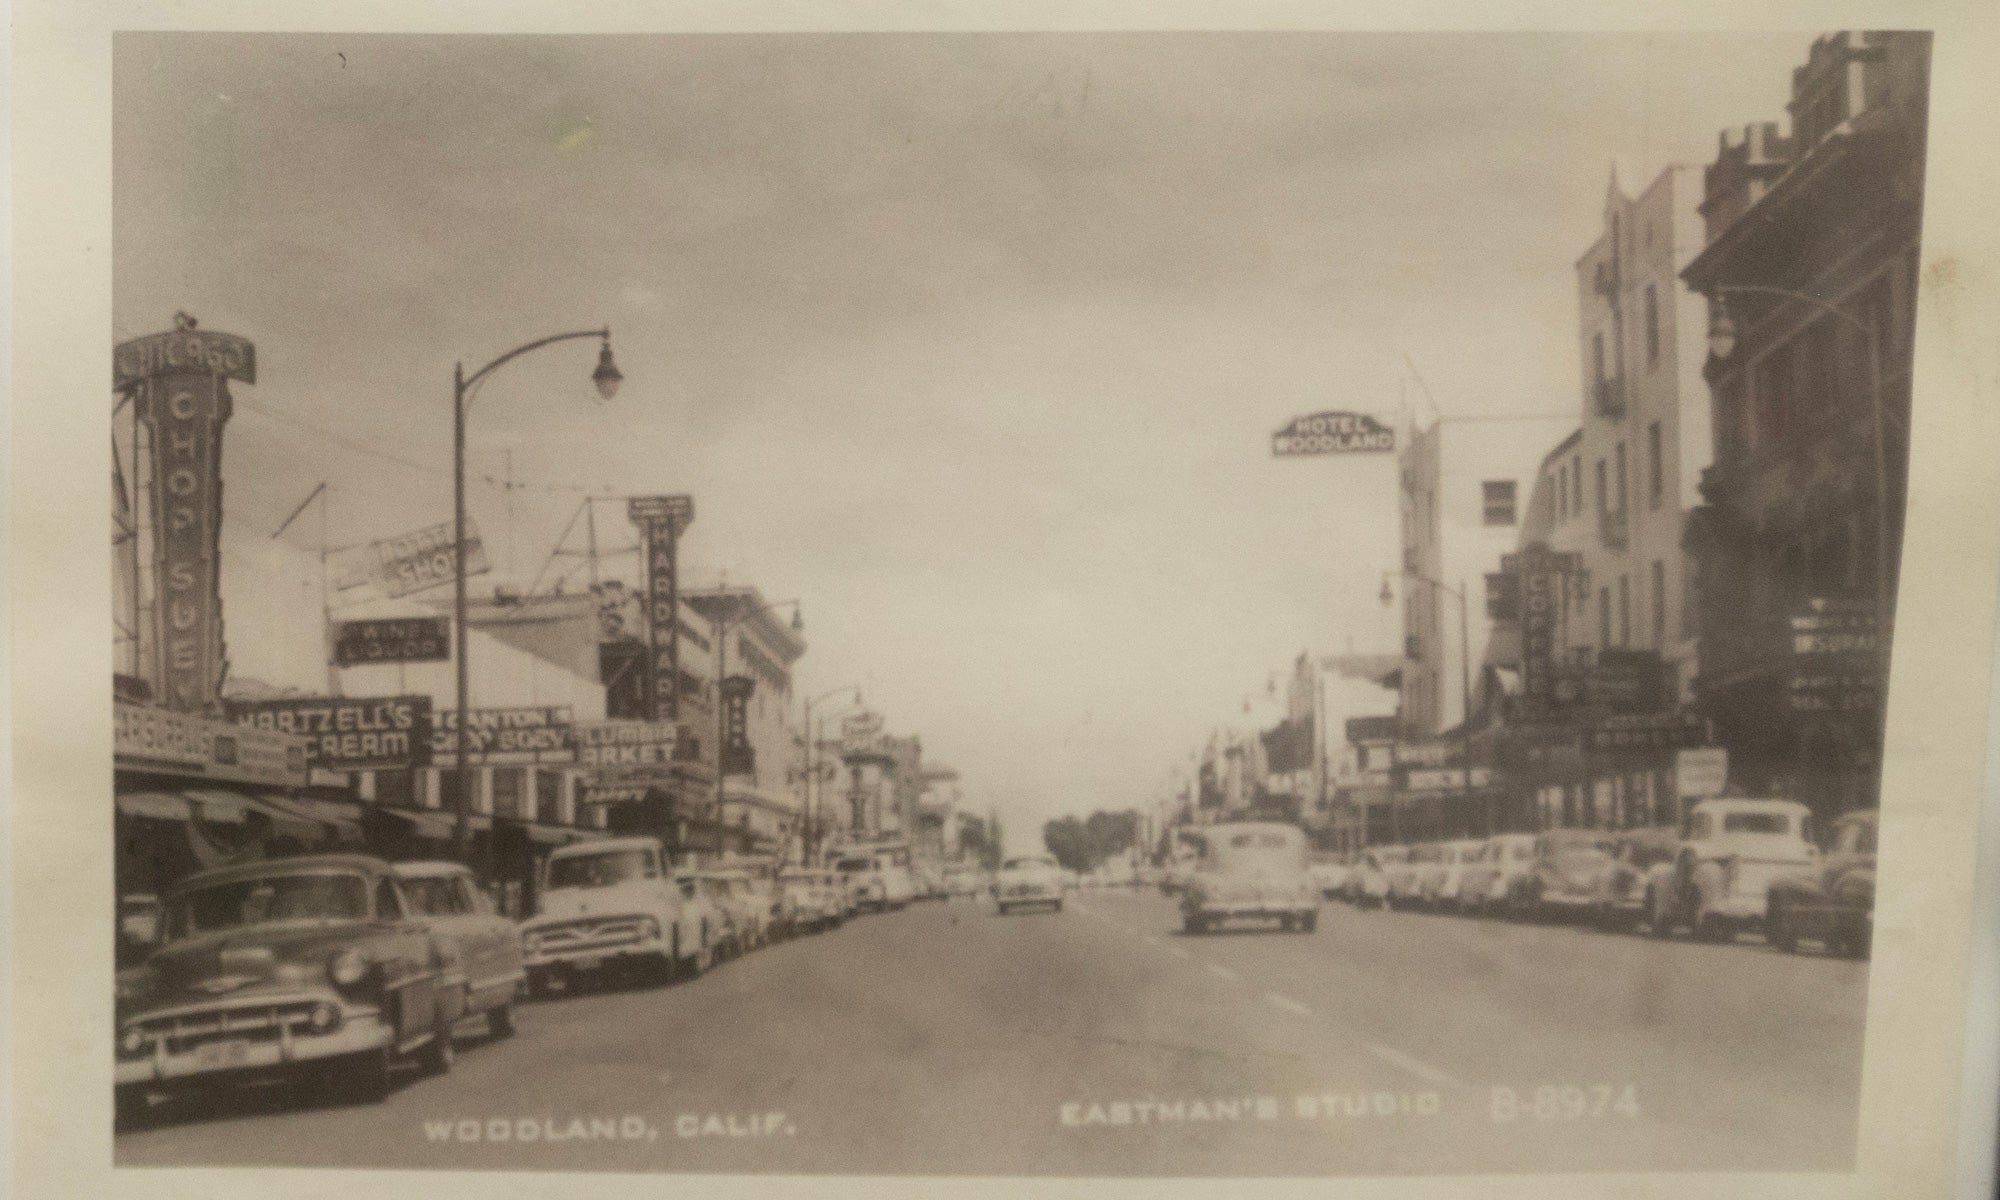 Black and white image of Woodland's Main Street in the mid-20th century